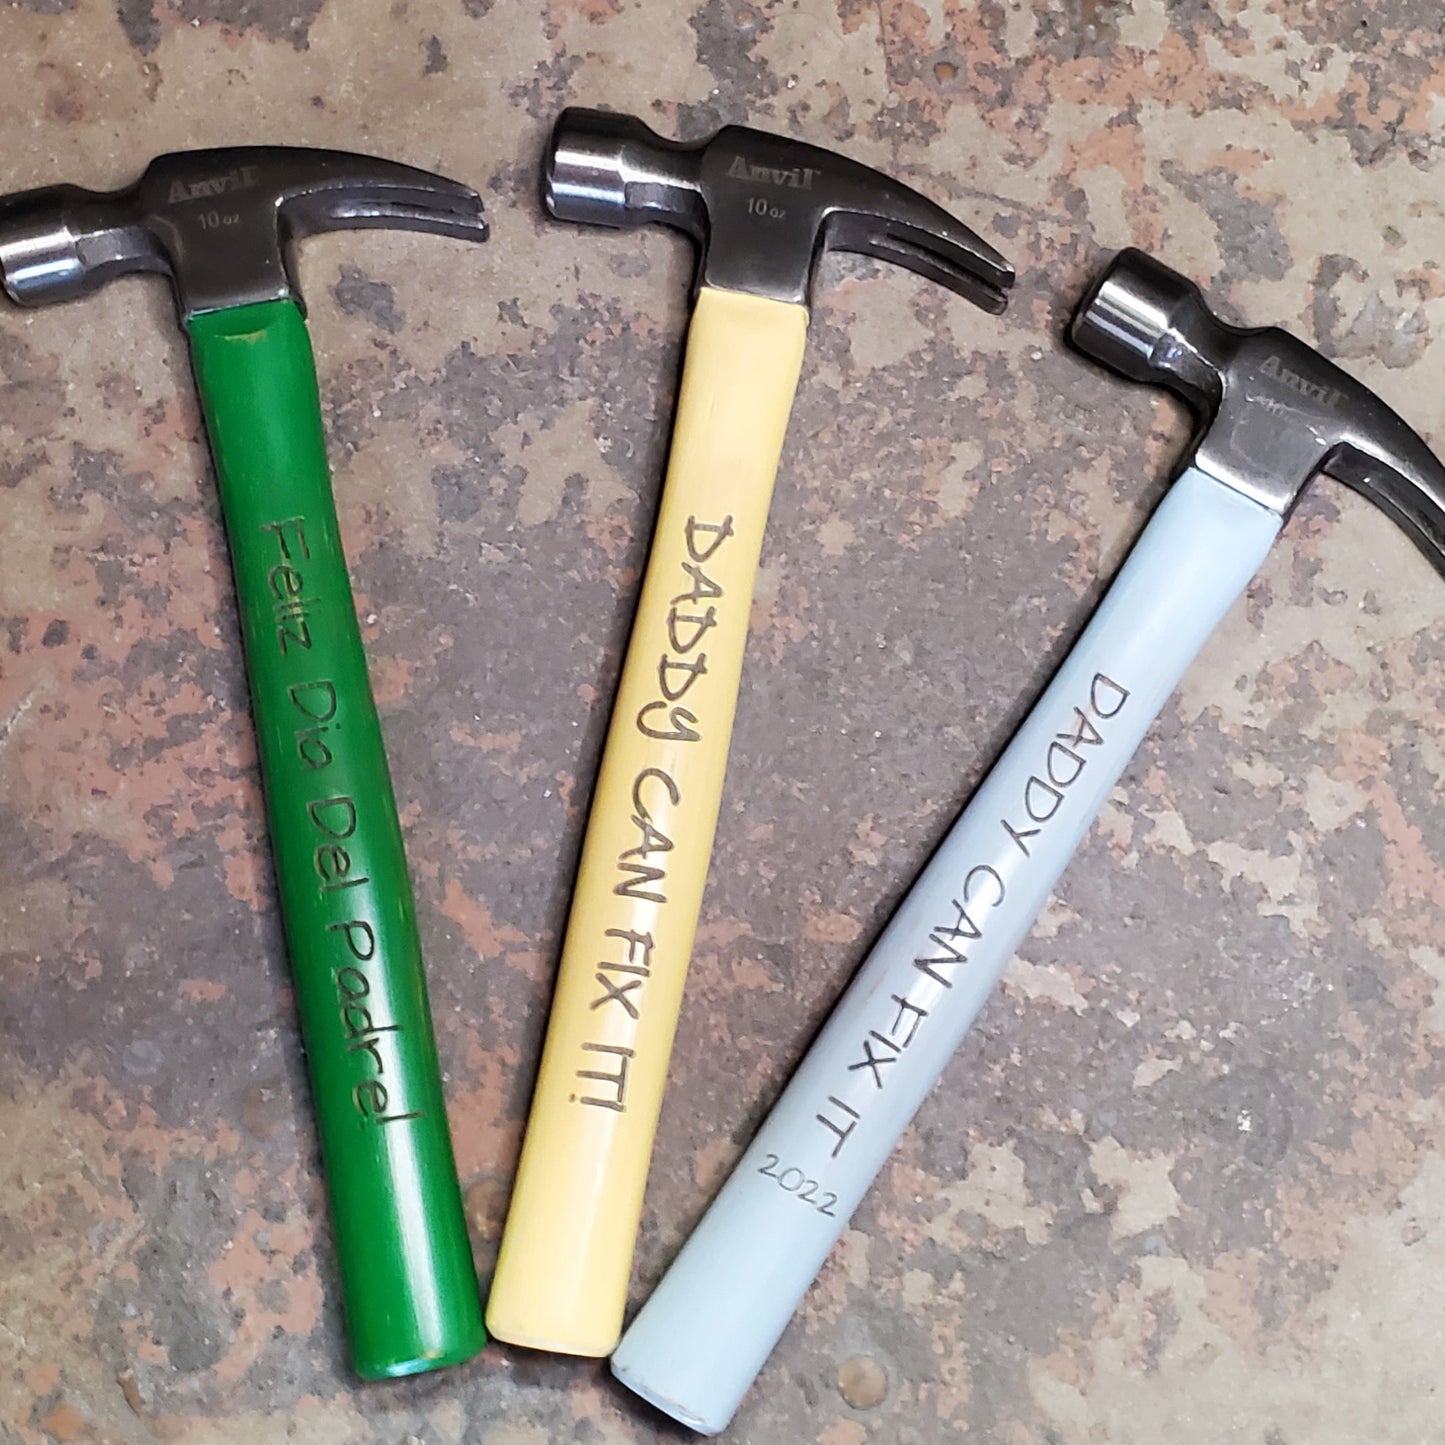 dad gift idea, colored hammers with personalized engravings